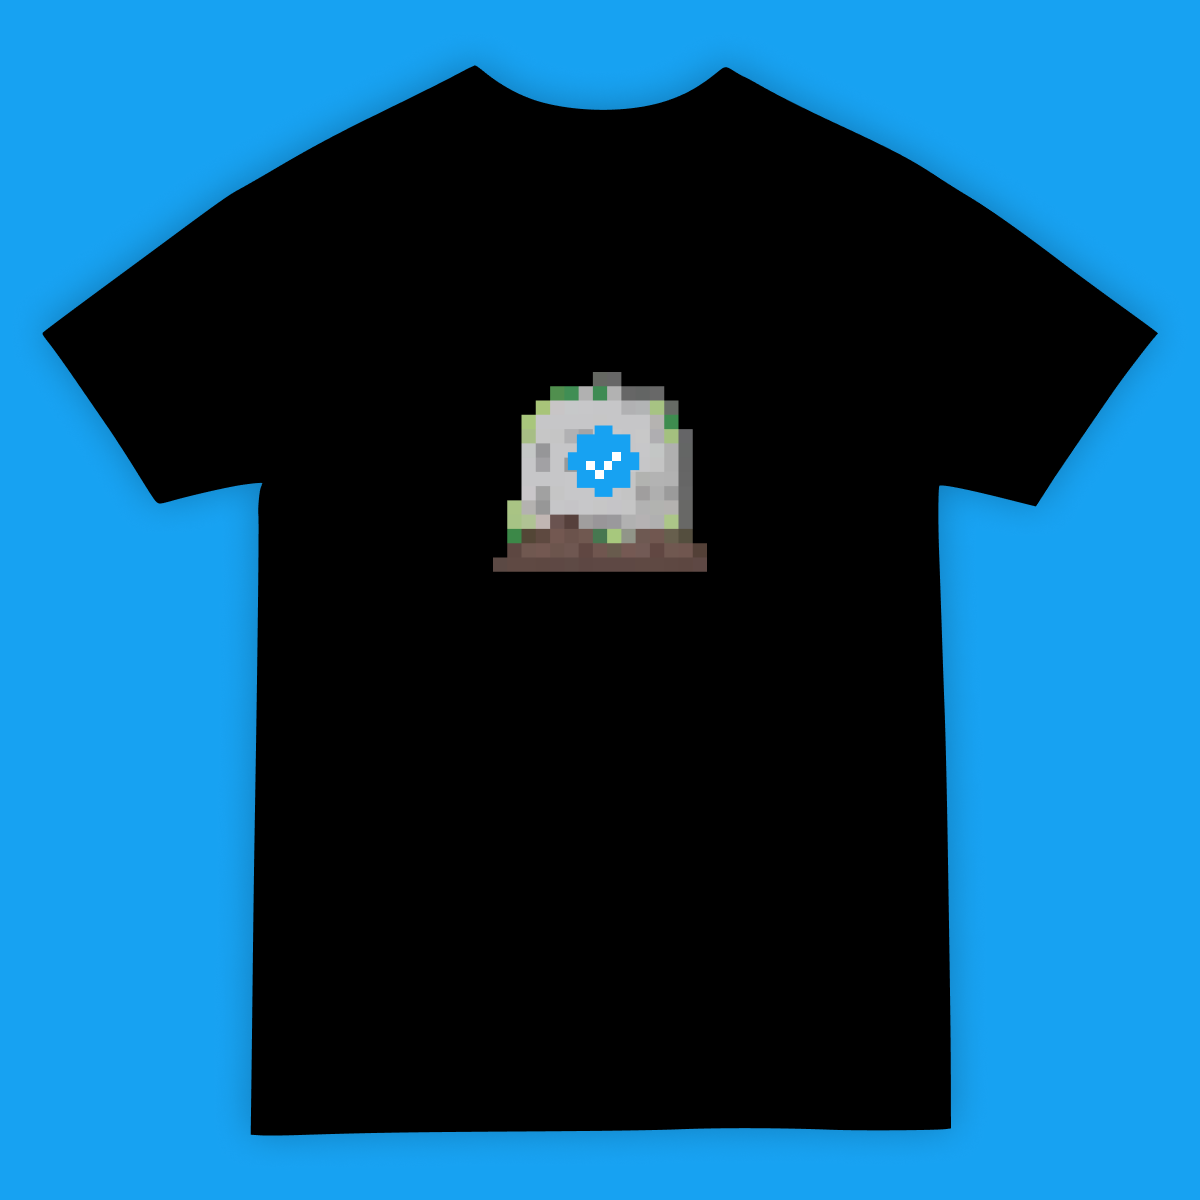 A t-shirt design. A twitter verified badge adorns a grave stone, all designed in an 8-bit pixelated style.